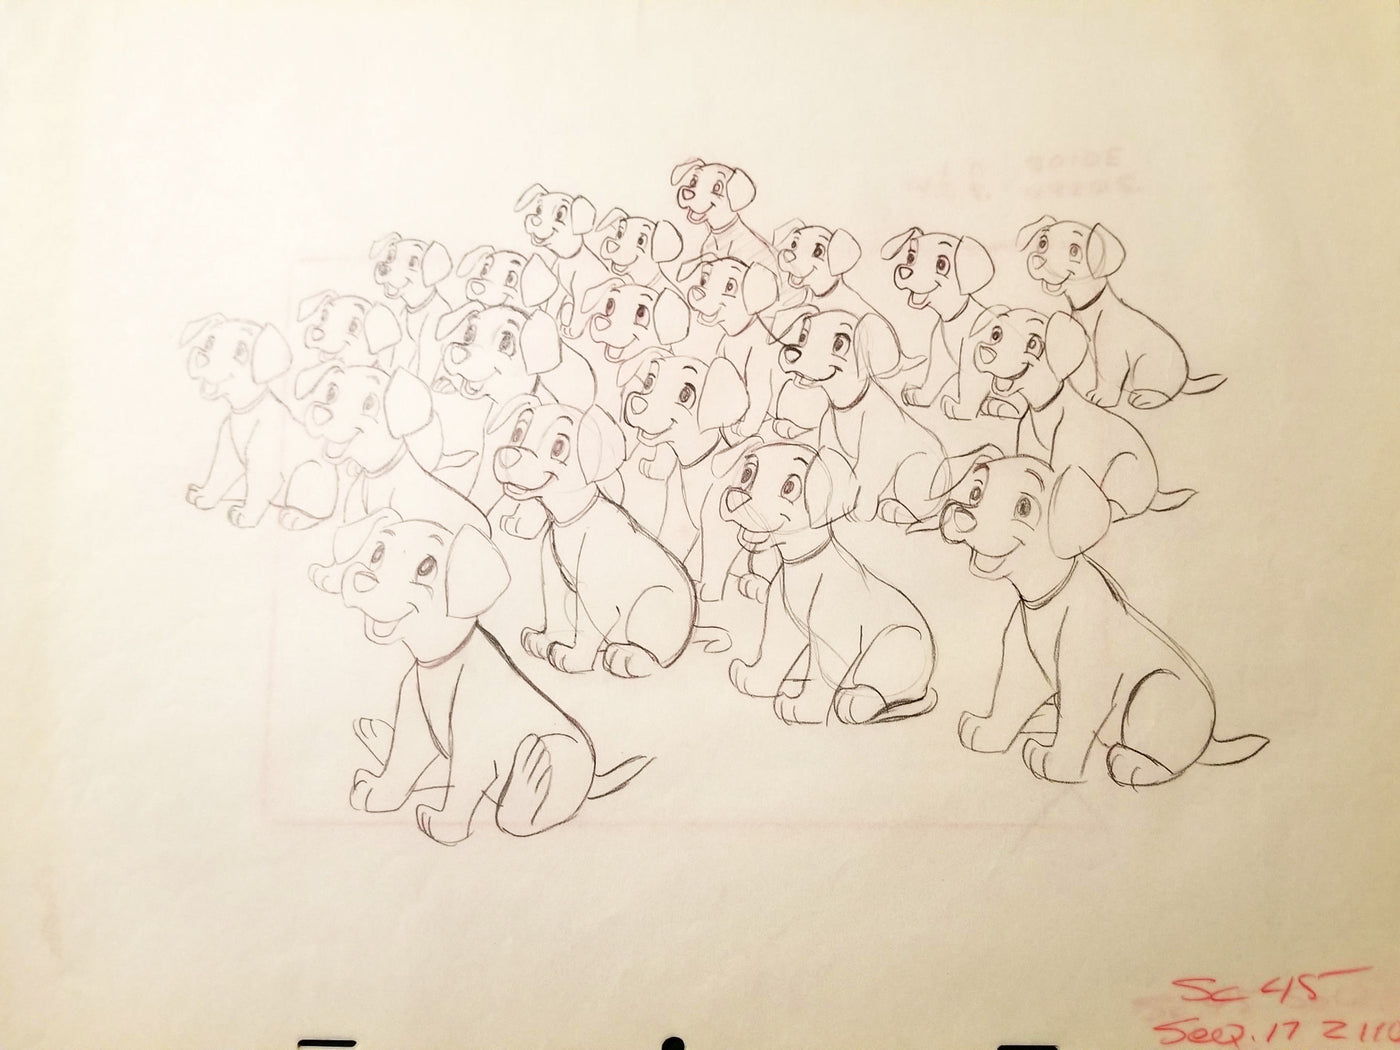 Original Walt Disney Production Drawing from One Hundred and One Dalmatians